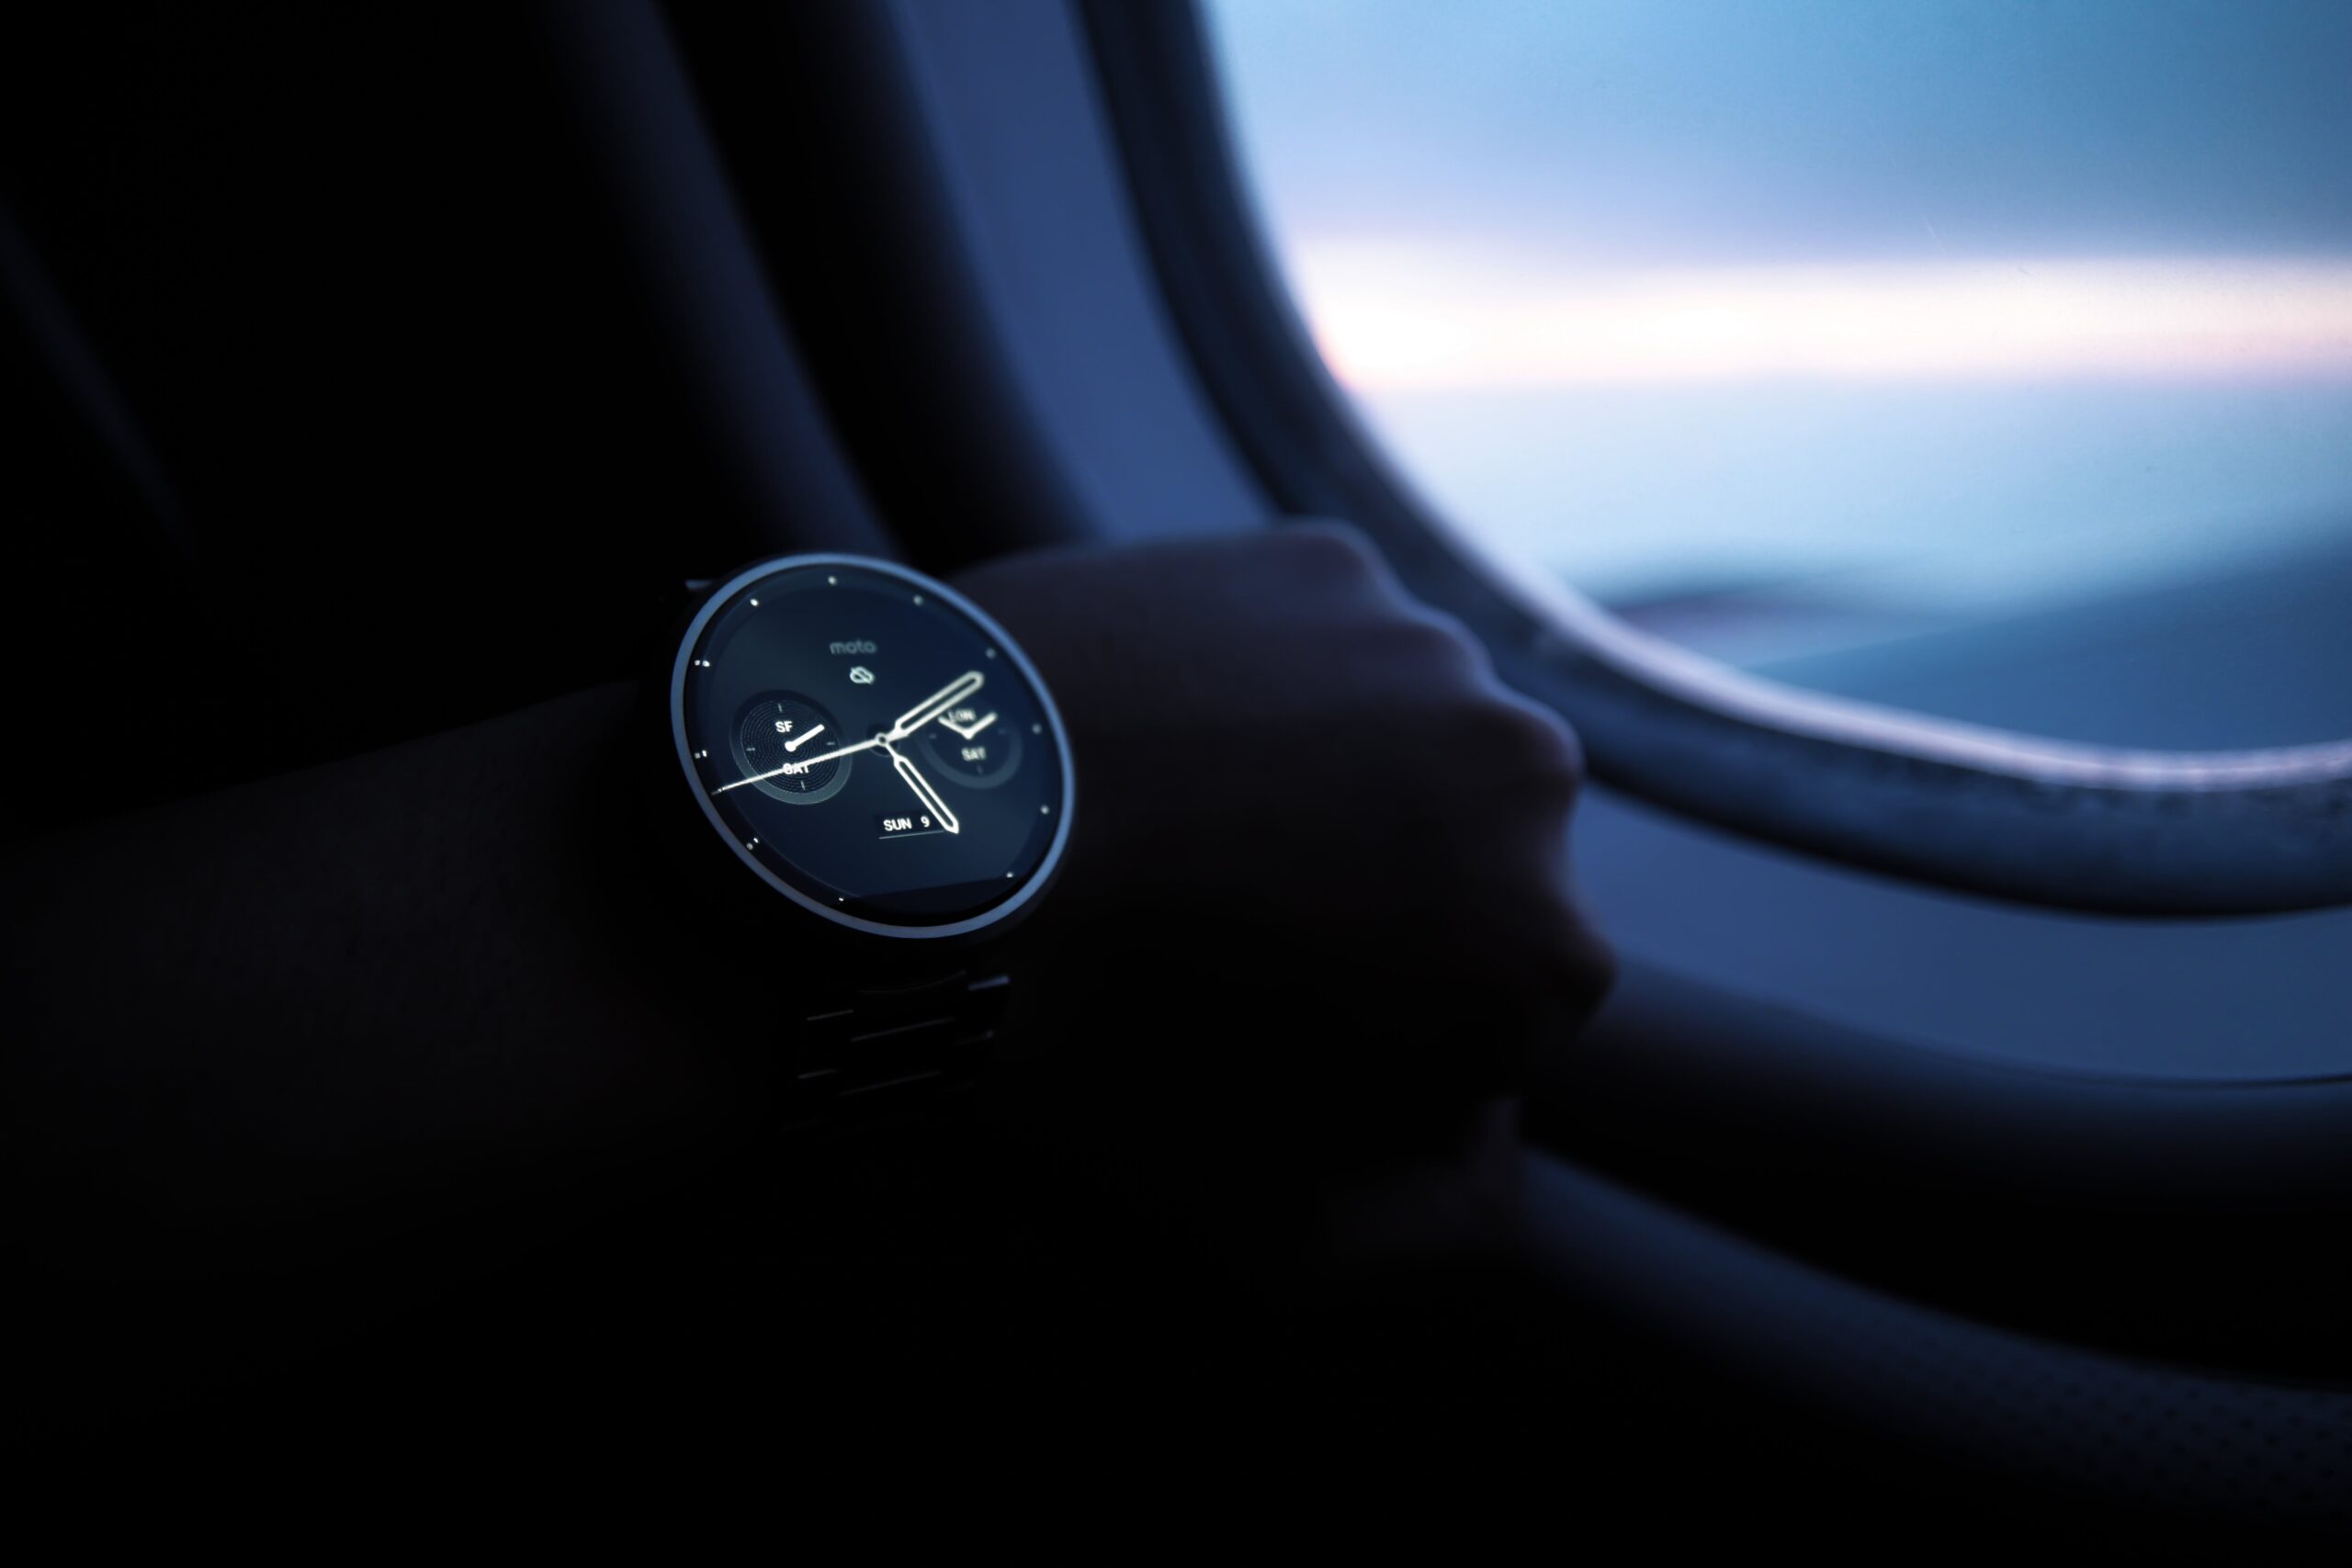 The Future of NFT - Wristwatch on a Plane